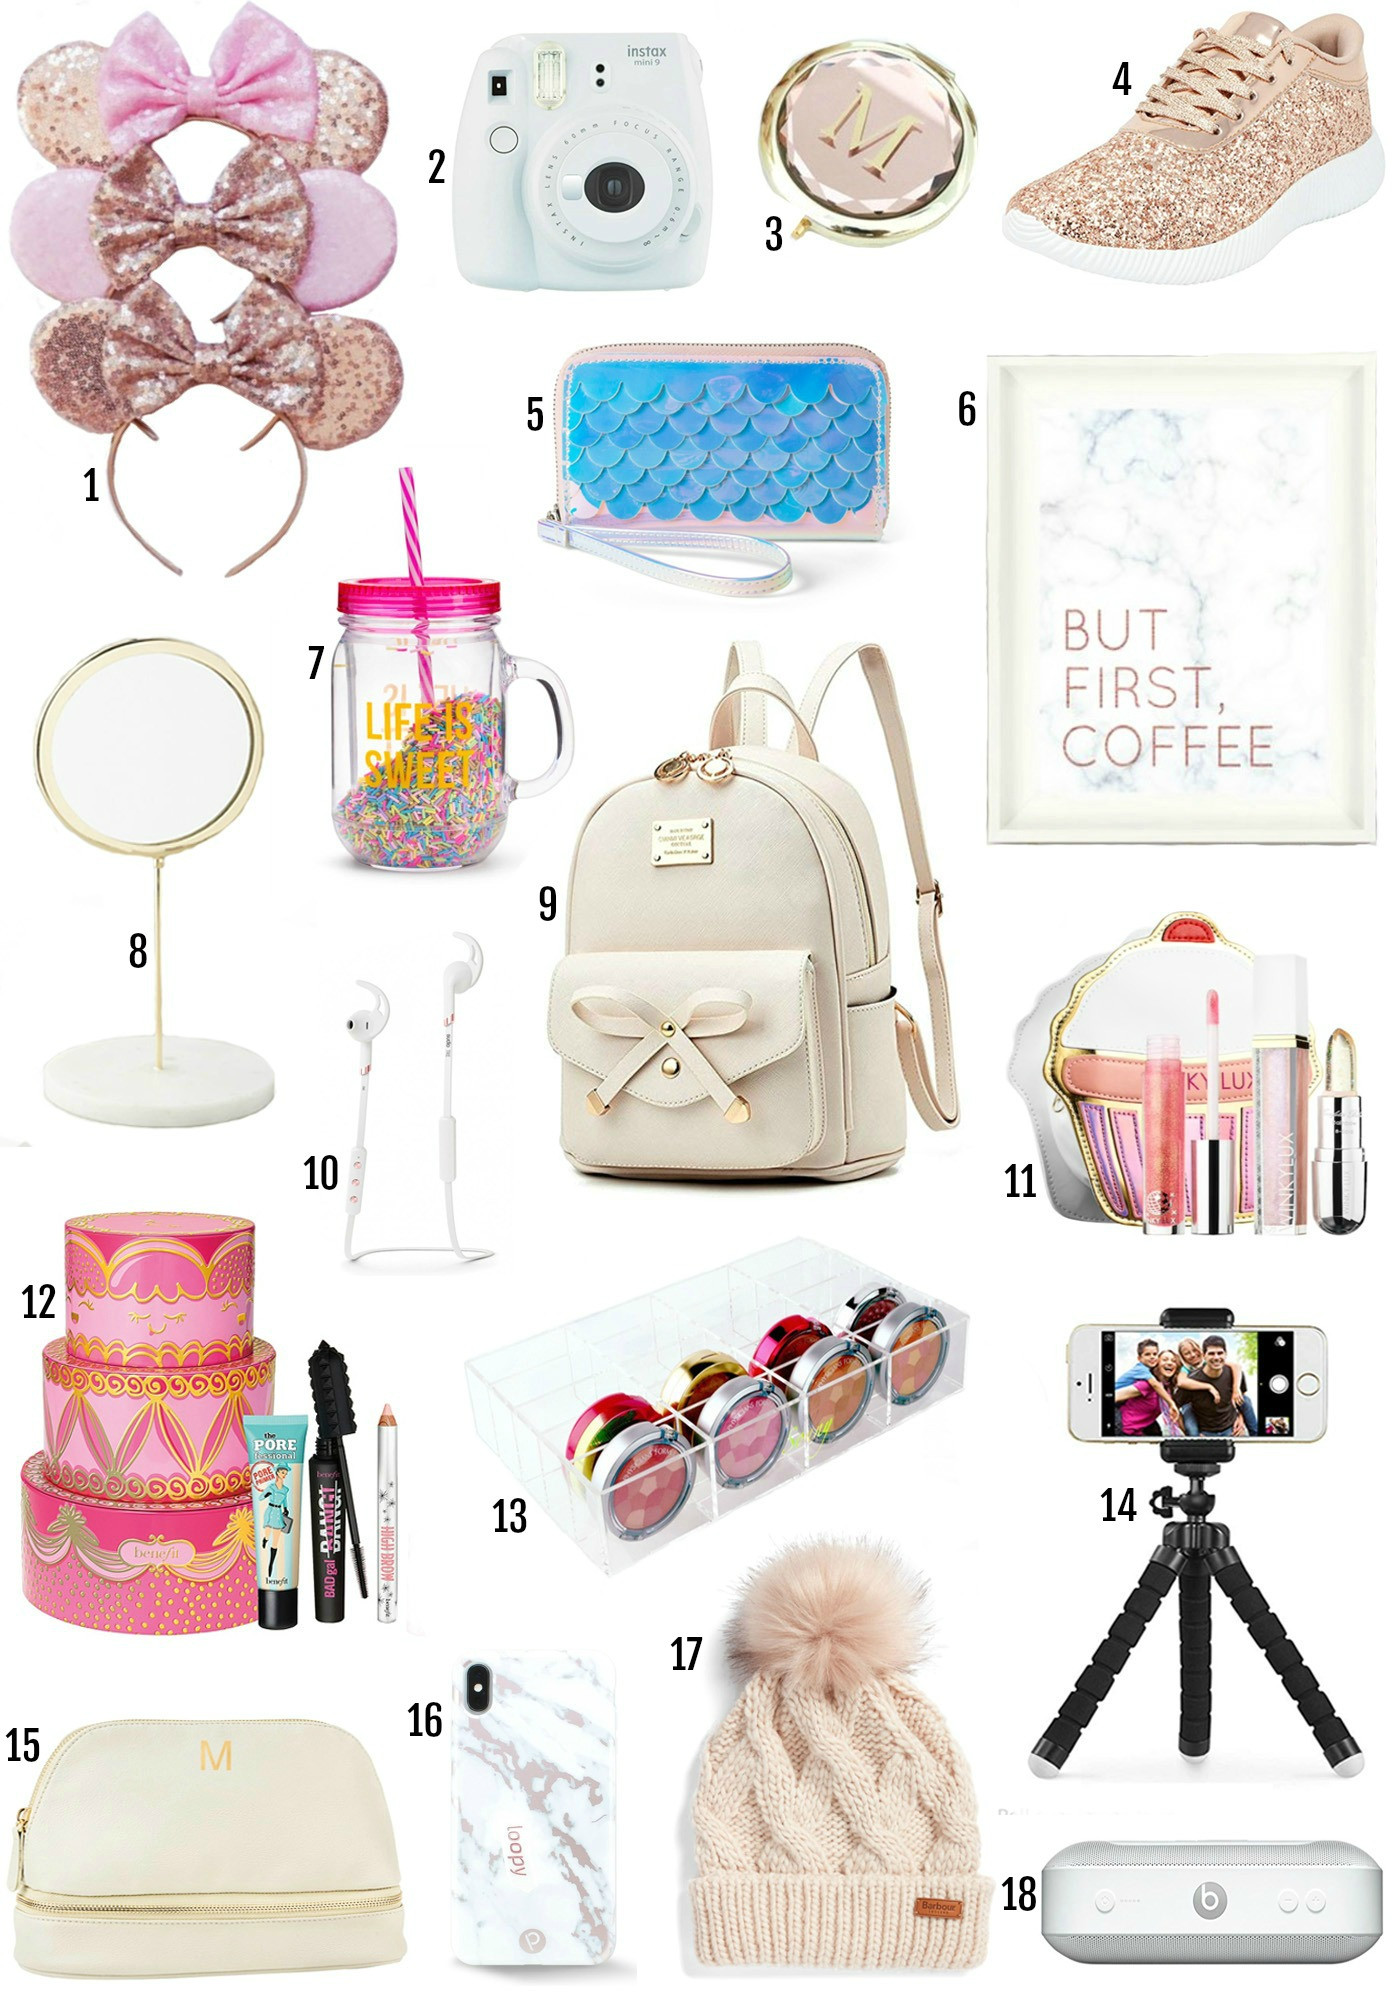 Christmas Gift Ideas For Young Girls
 Top Gifts For Teens